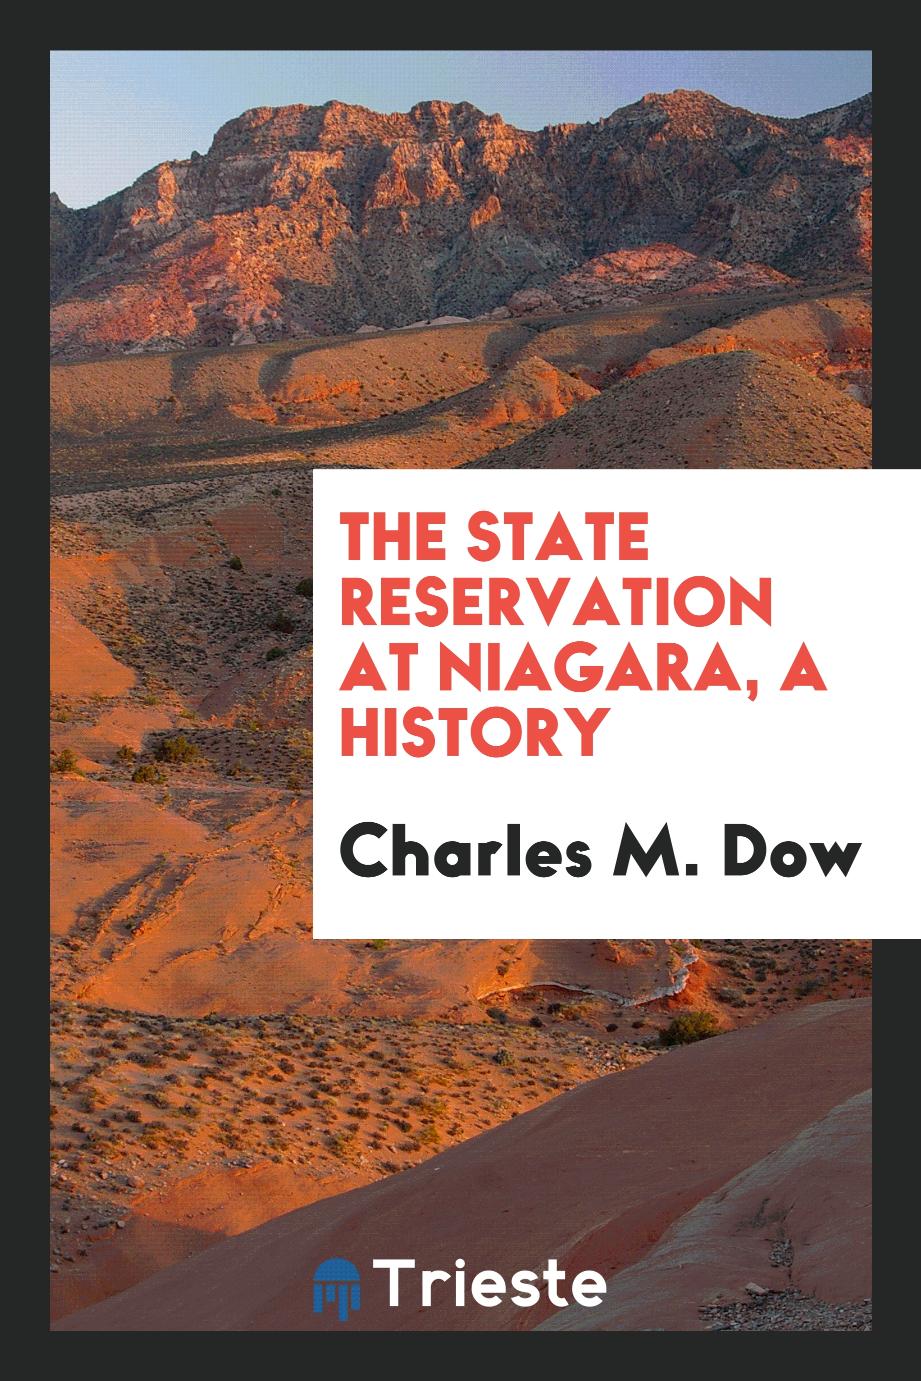 The State Reservation at Niagara, a History